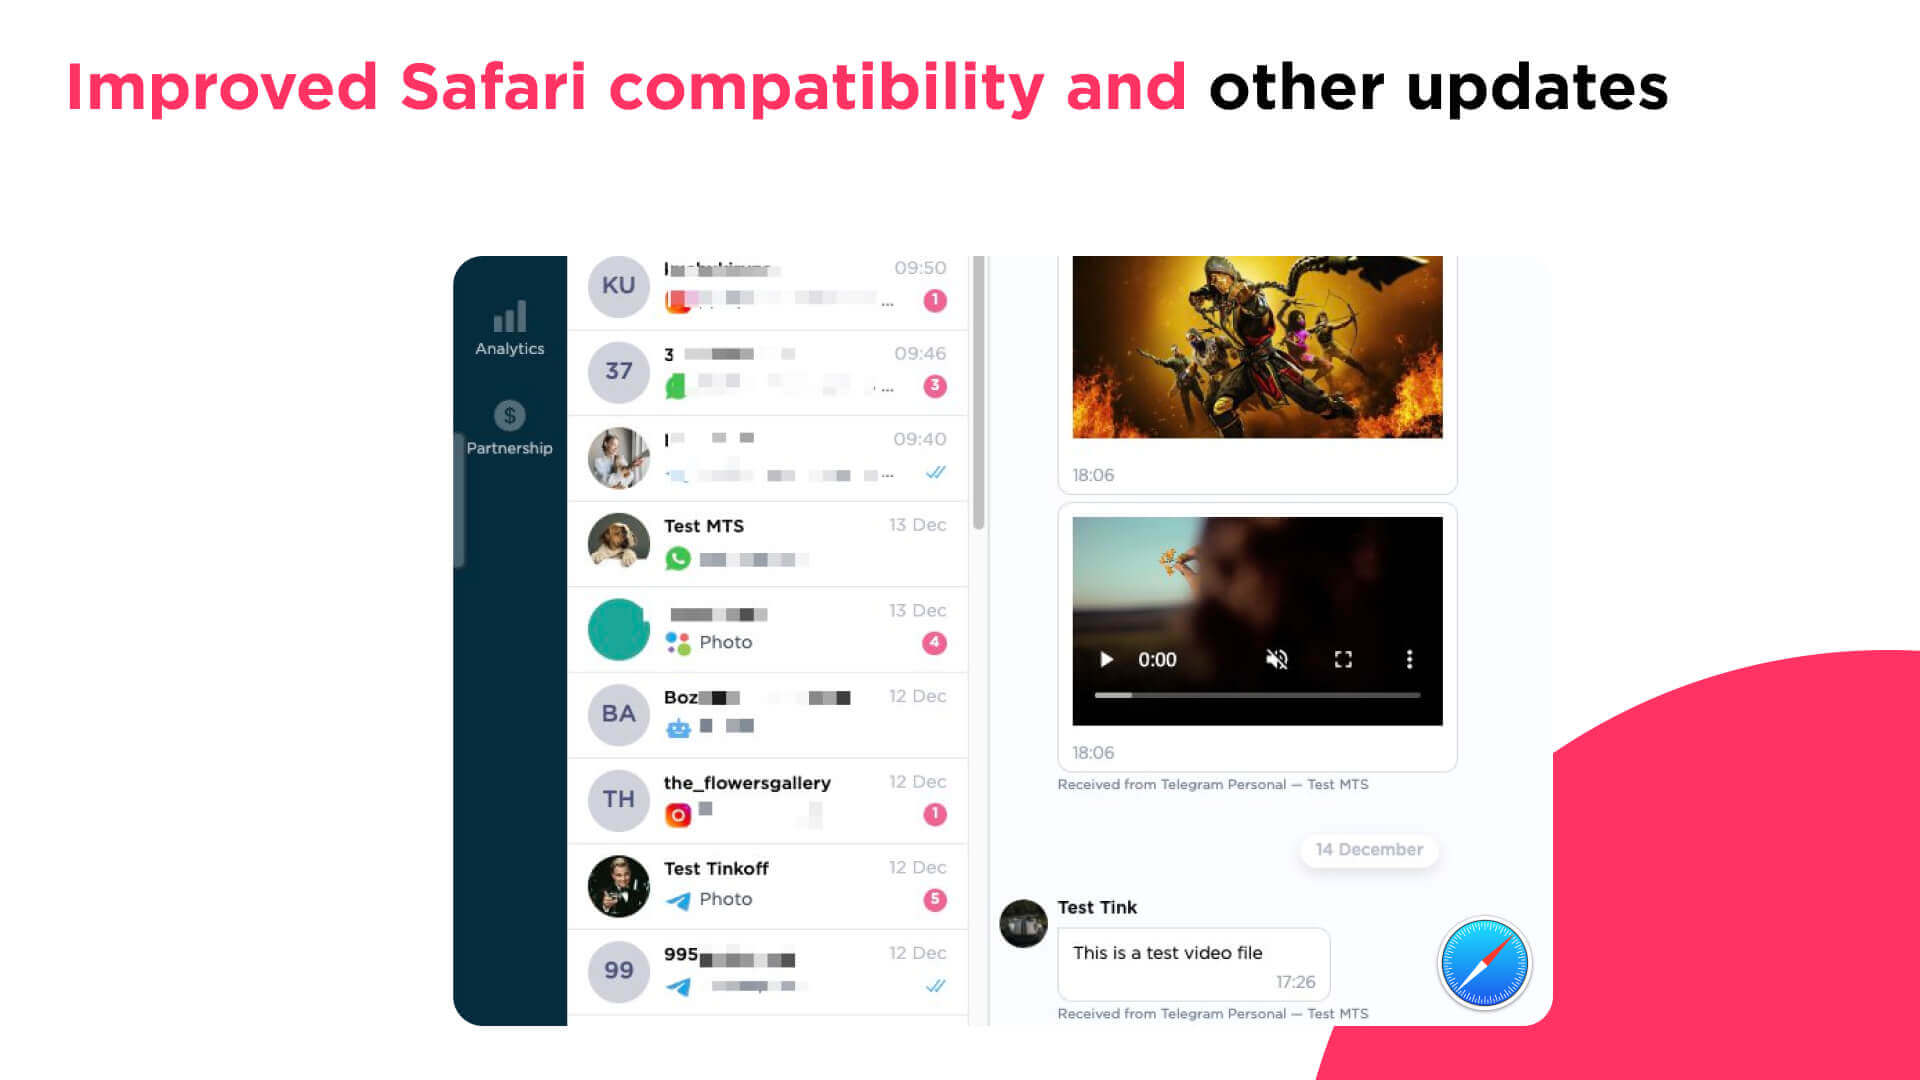 Improved Safari compatibility and other updates